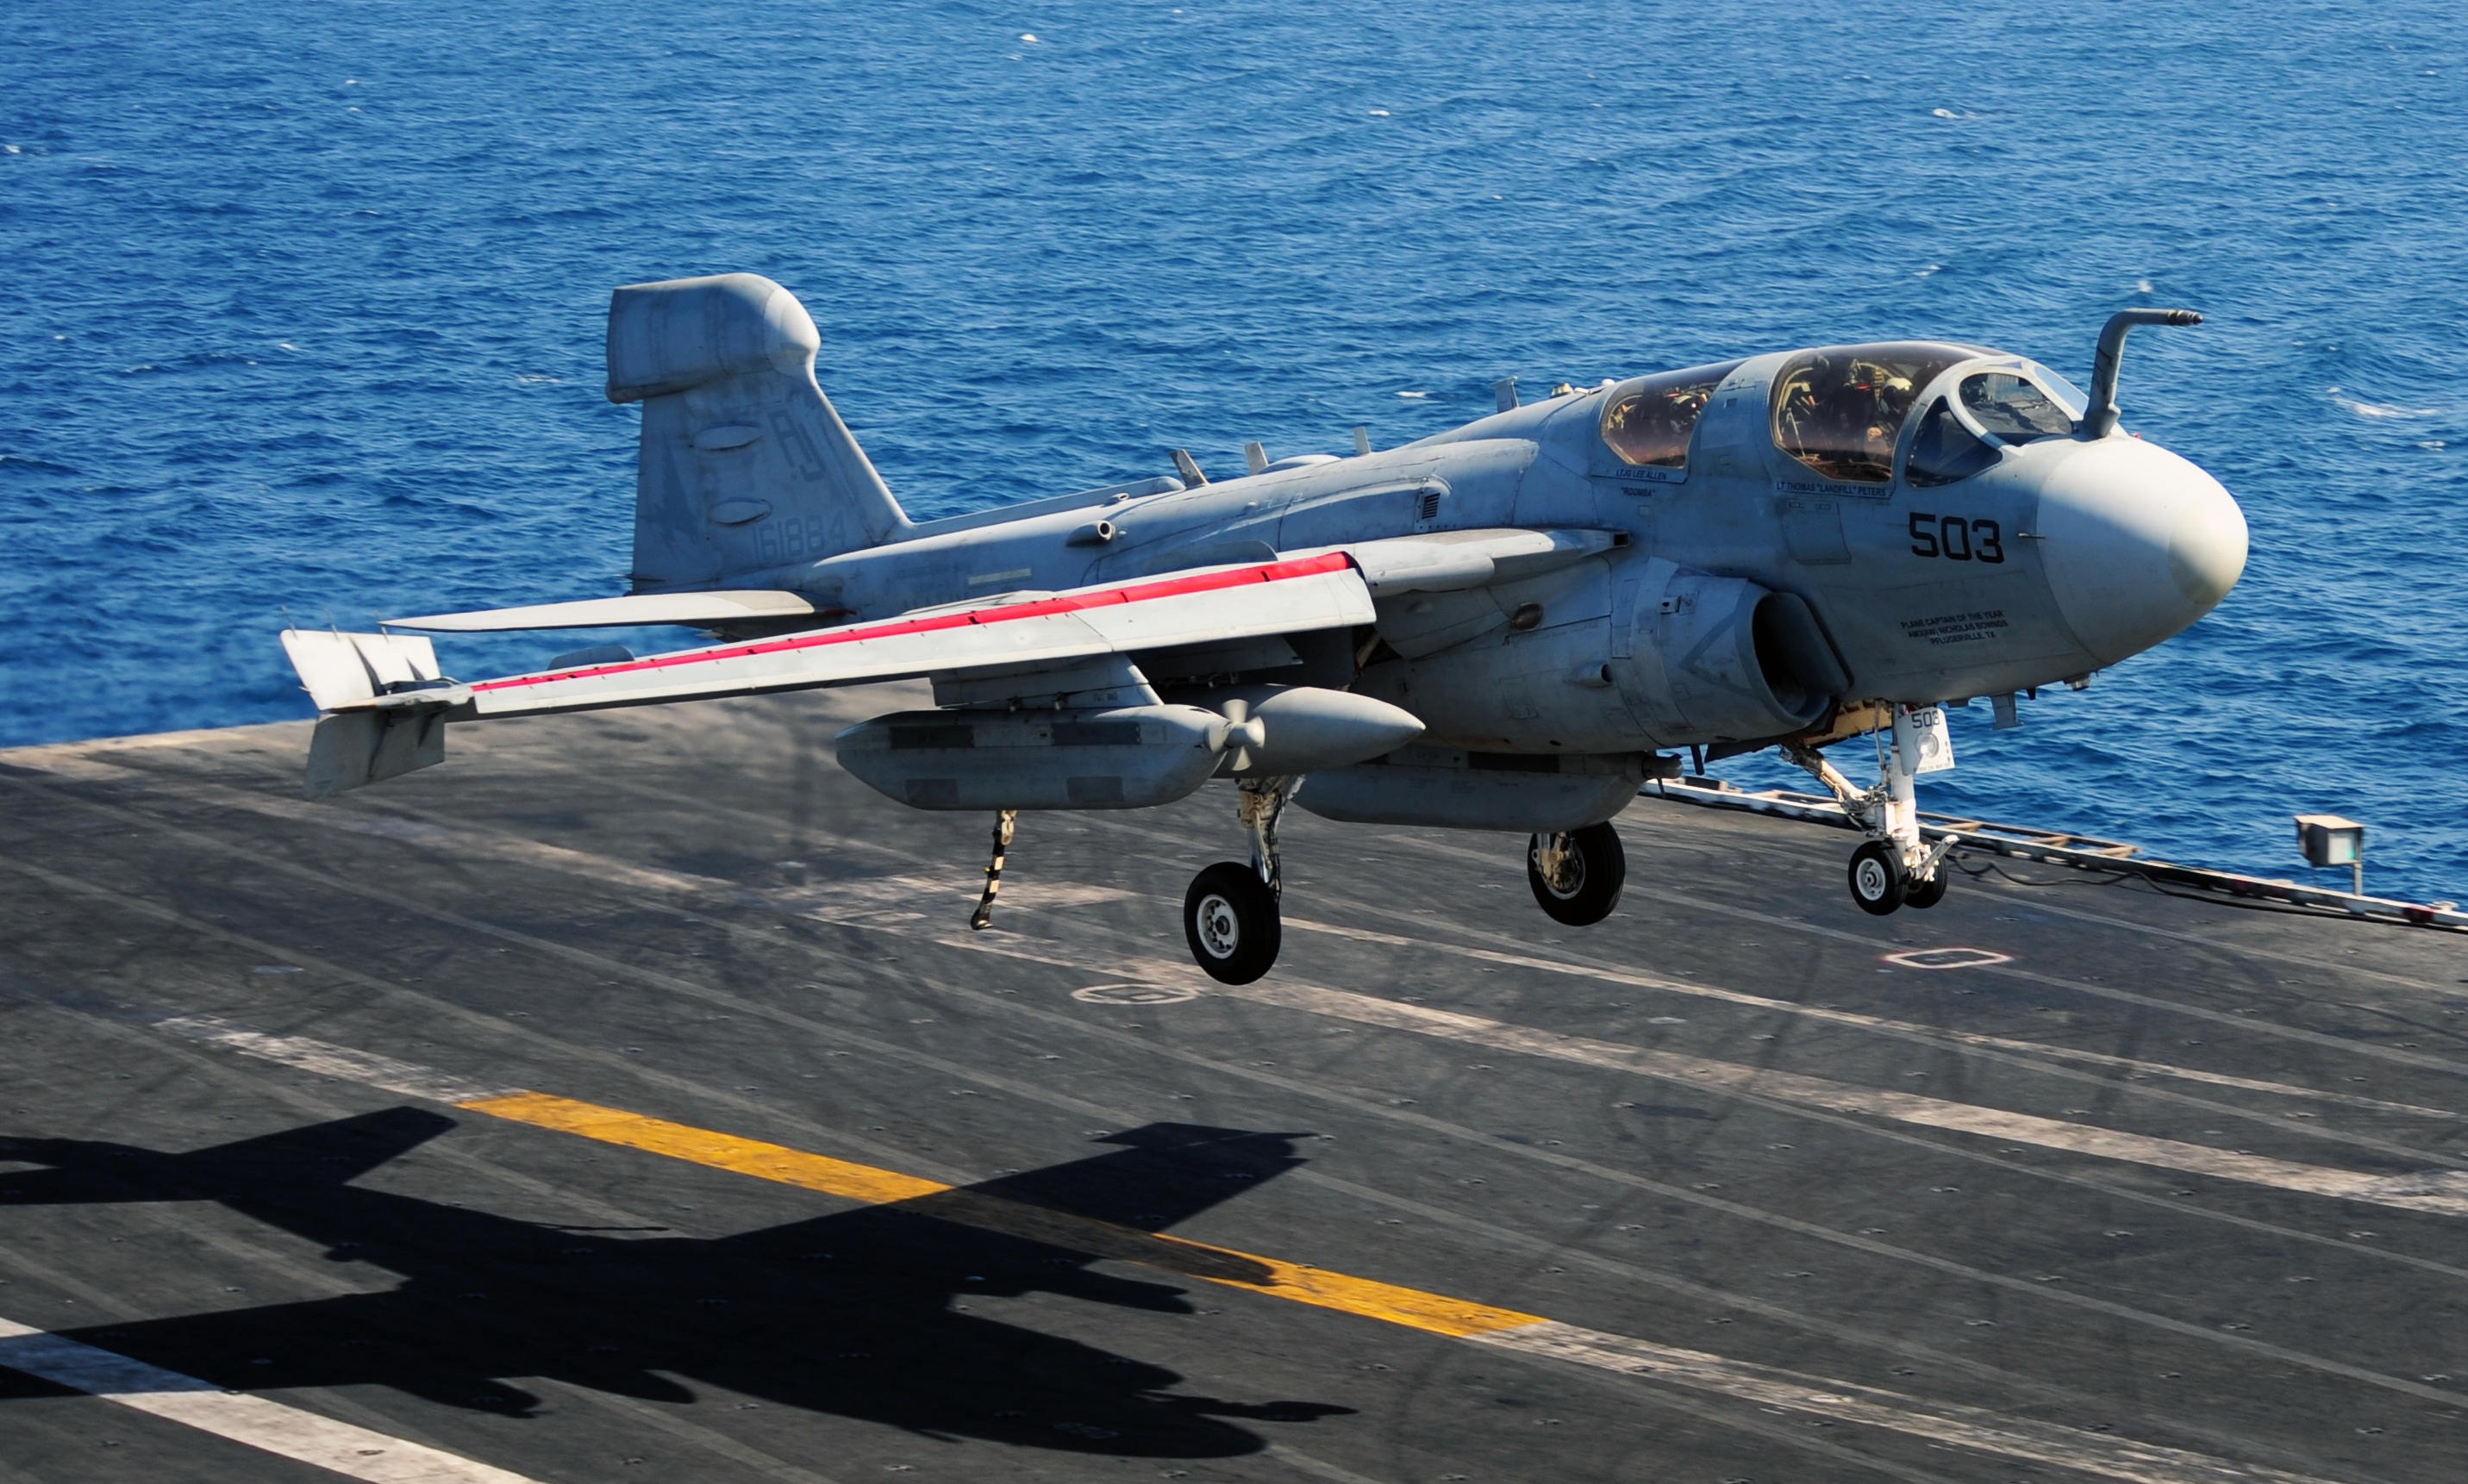 An EA-6B Prowler from VAQ-134 Garudas landing aboard the USS George H.W. Bush during the squadron's final operational Prowler tour last year. A Prowler from VAQ-134 will be joining the Museum of Flight's collection on May 27th. (U.S. Navy photo by Mass Communication Specialist 3rd Class Joshua Card/Released)